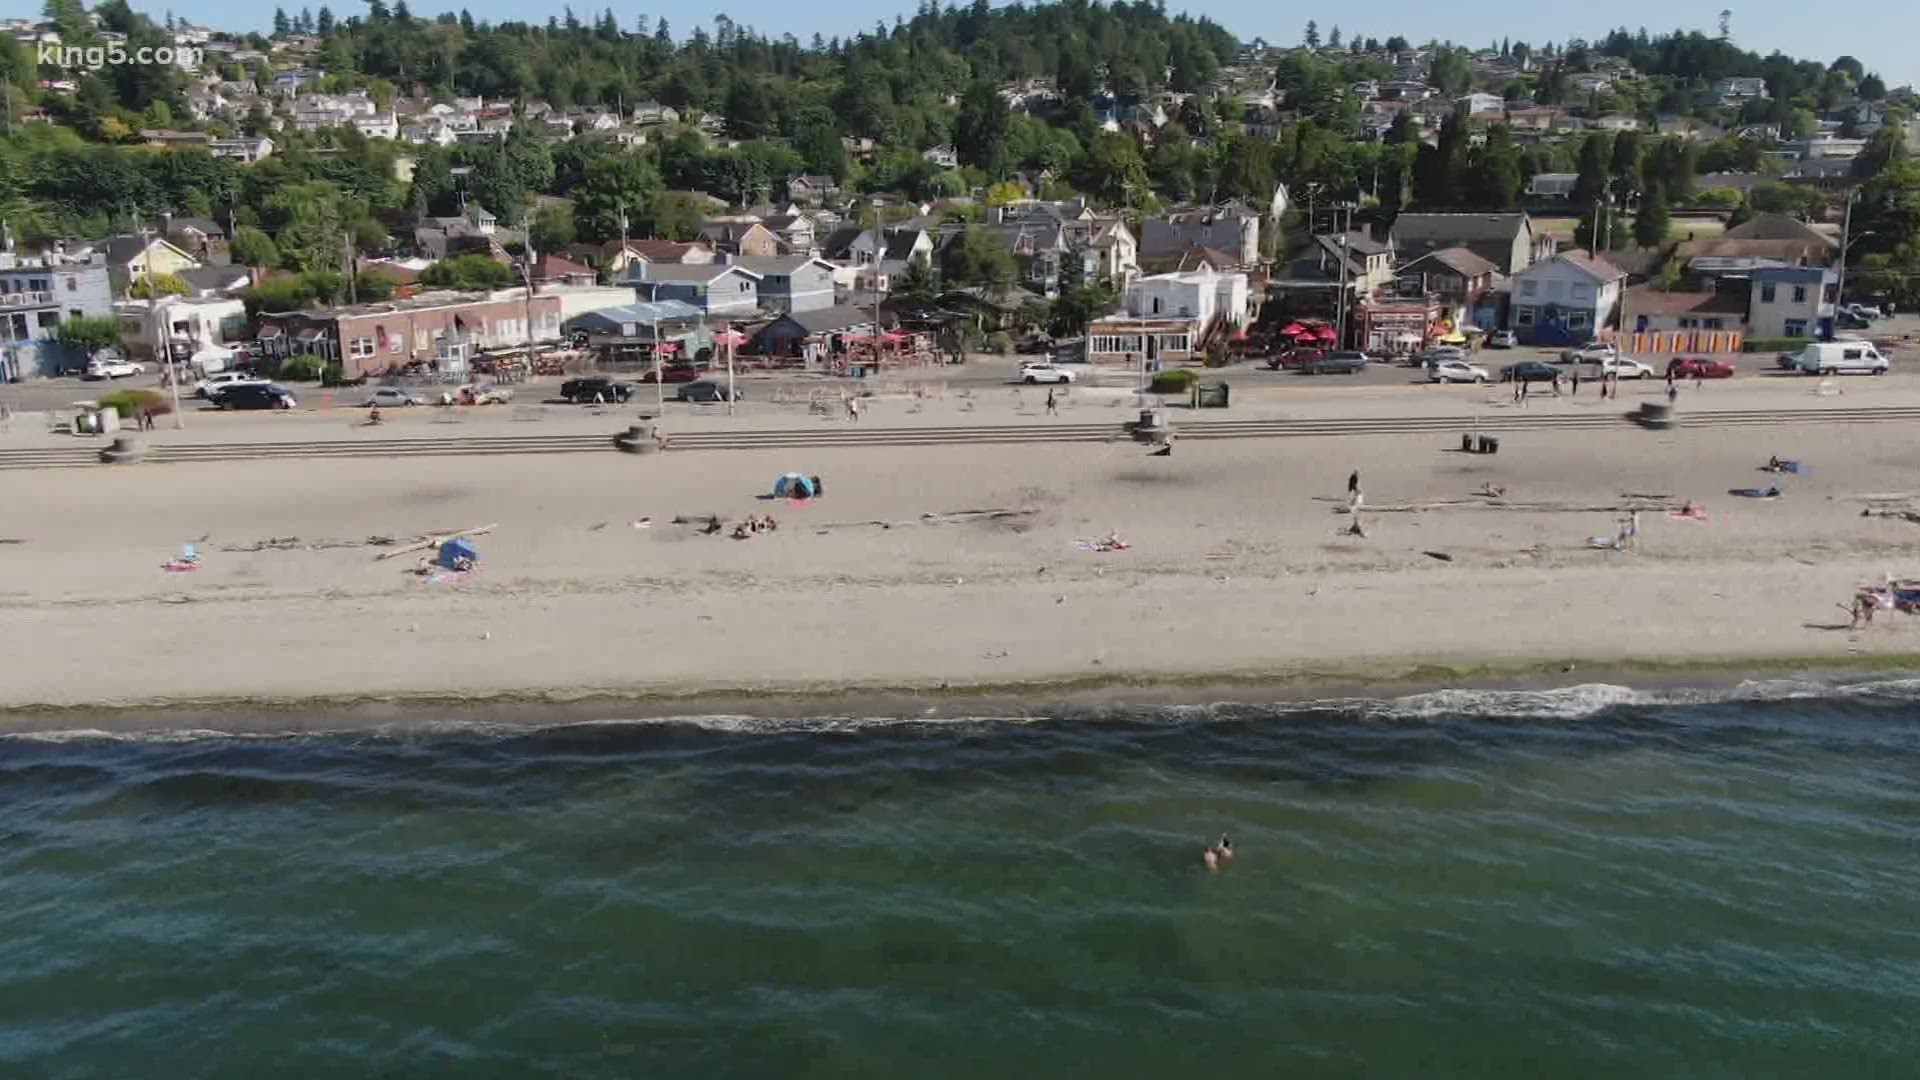 There are new changes at Alki Beach Park in West Seattle aimed at getting people to leave when it closes.